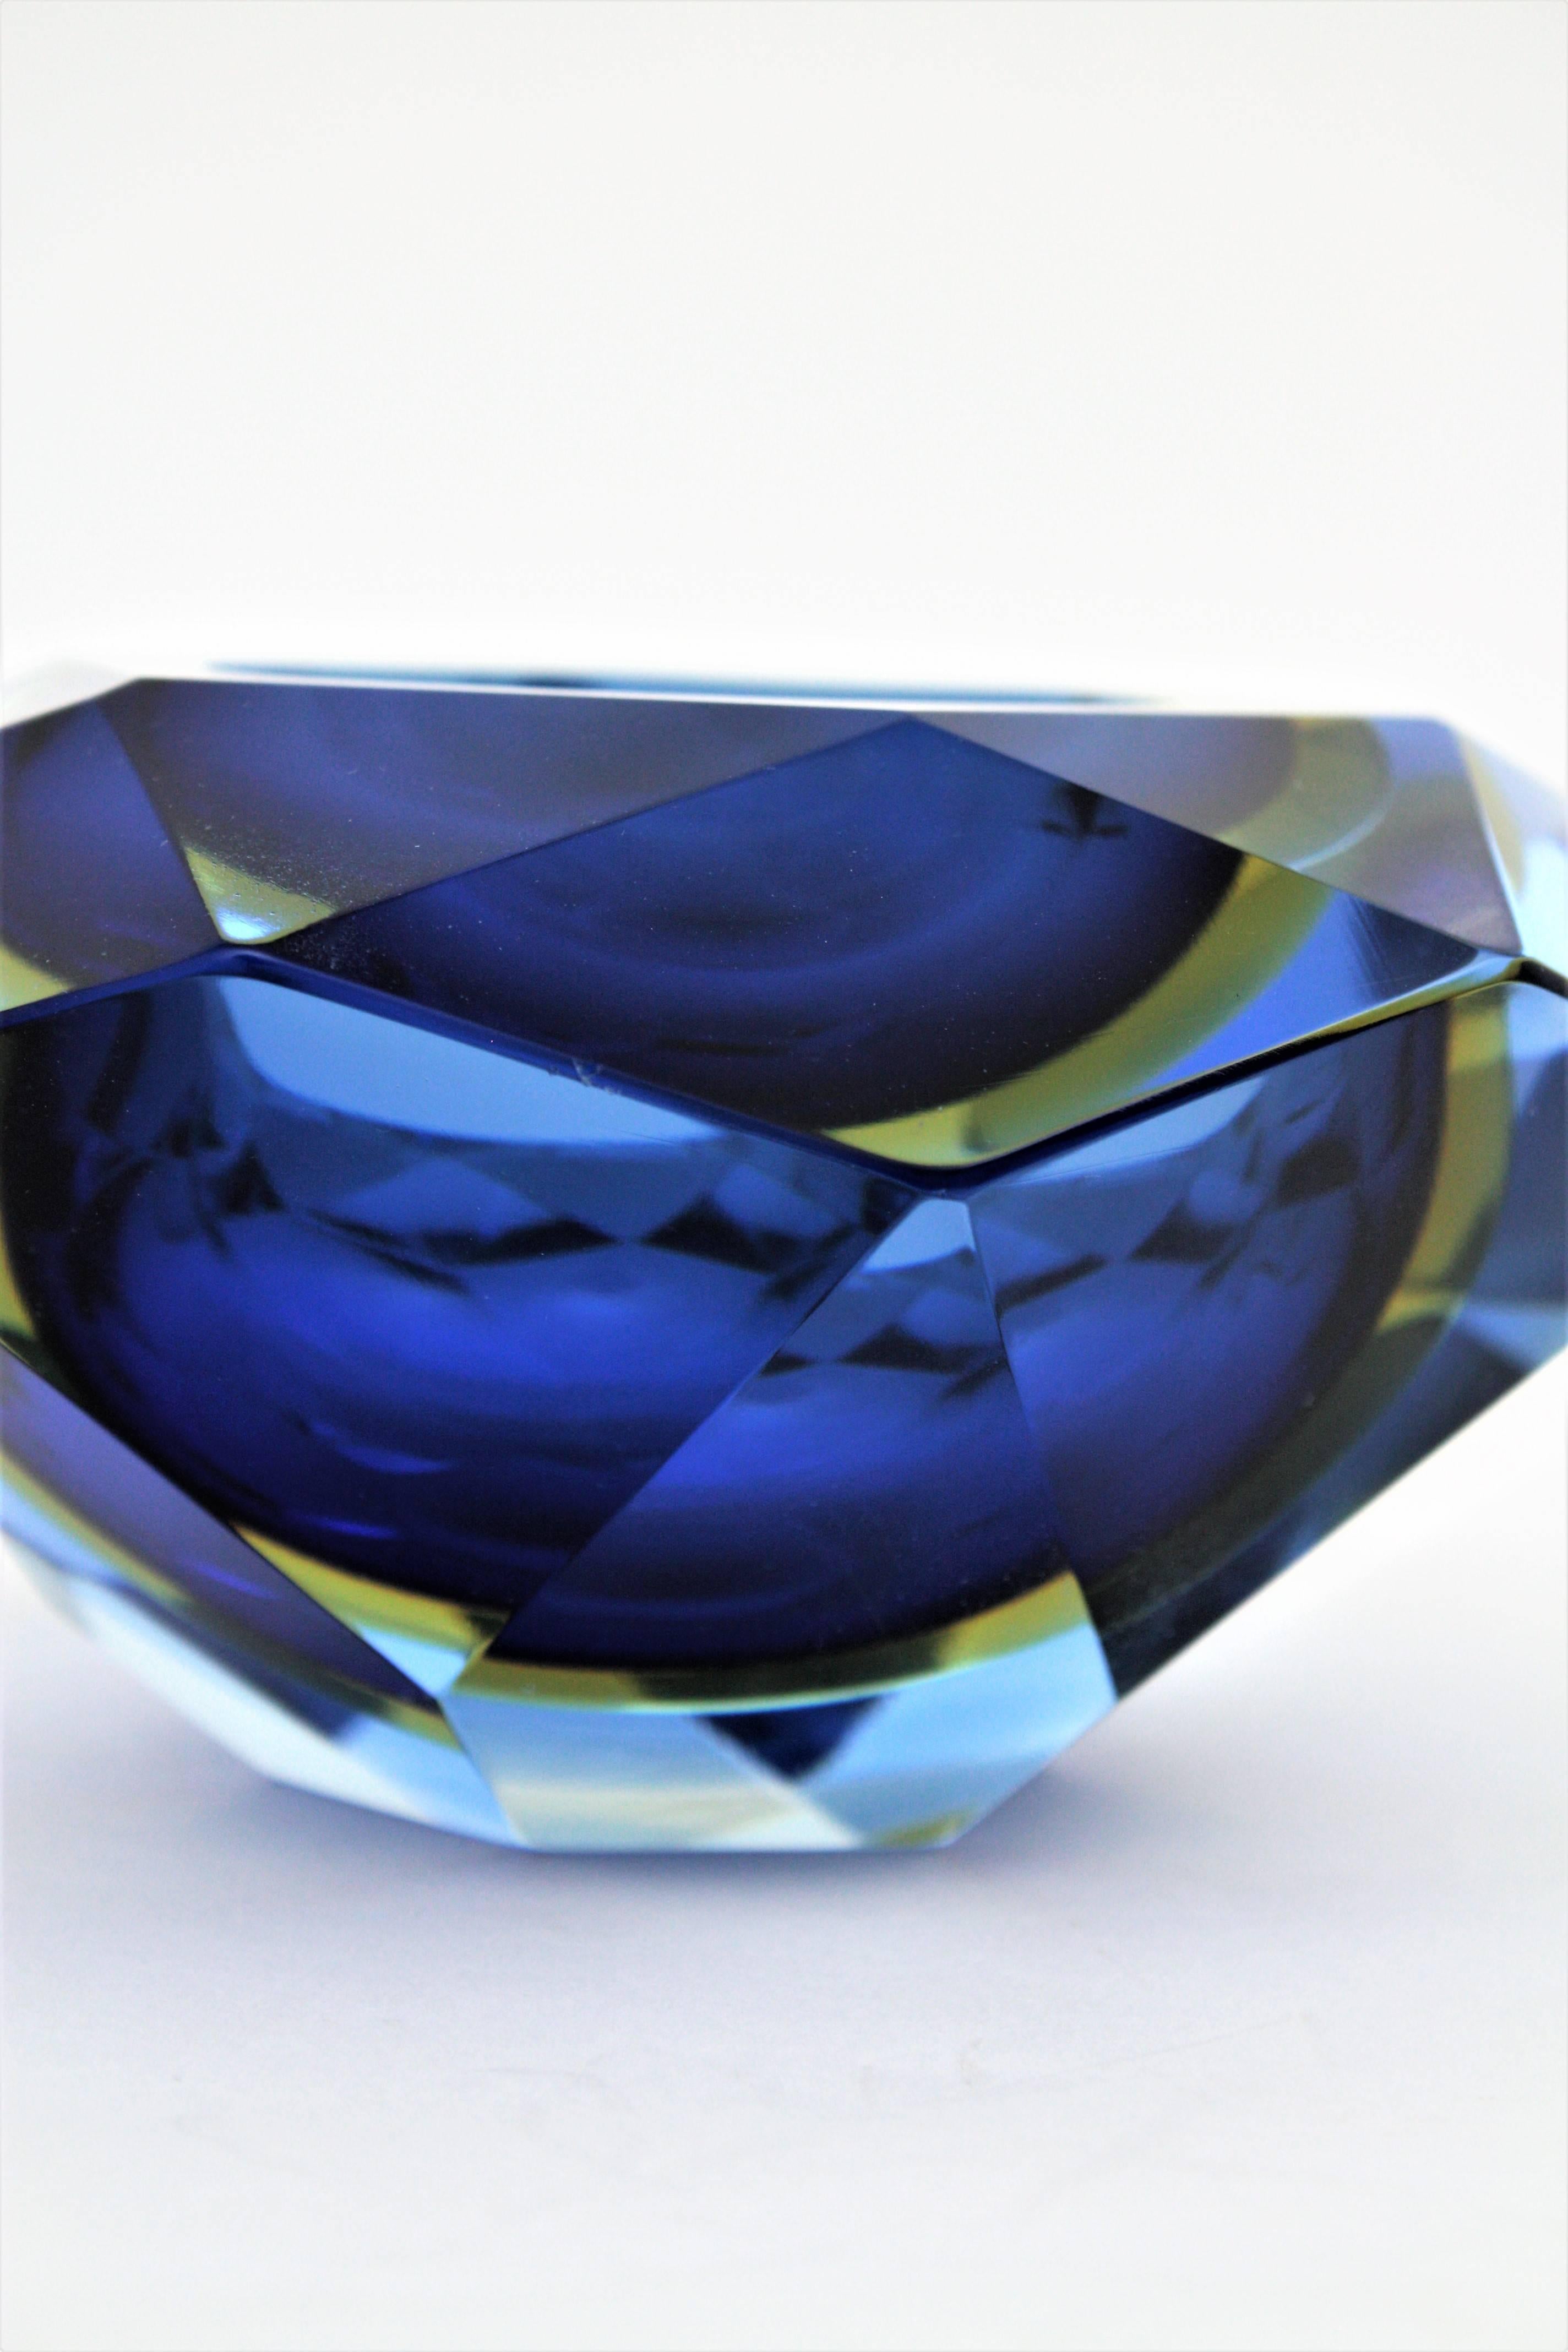 Flavio Poli Murano Cobalt Blue and Yellow Sommerso Faceted Giant Art Glass Bowl 5